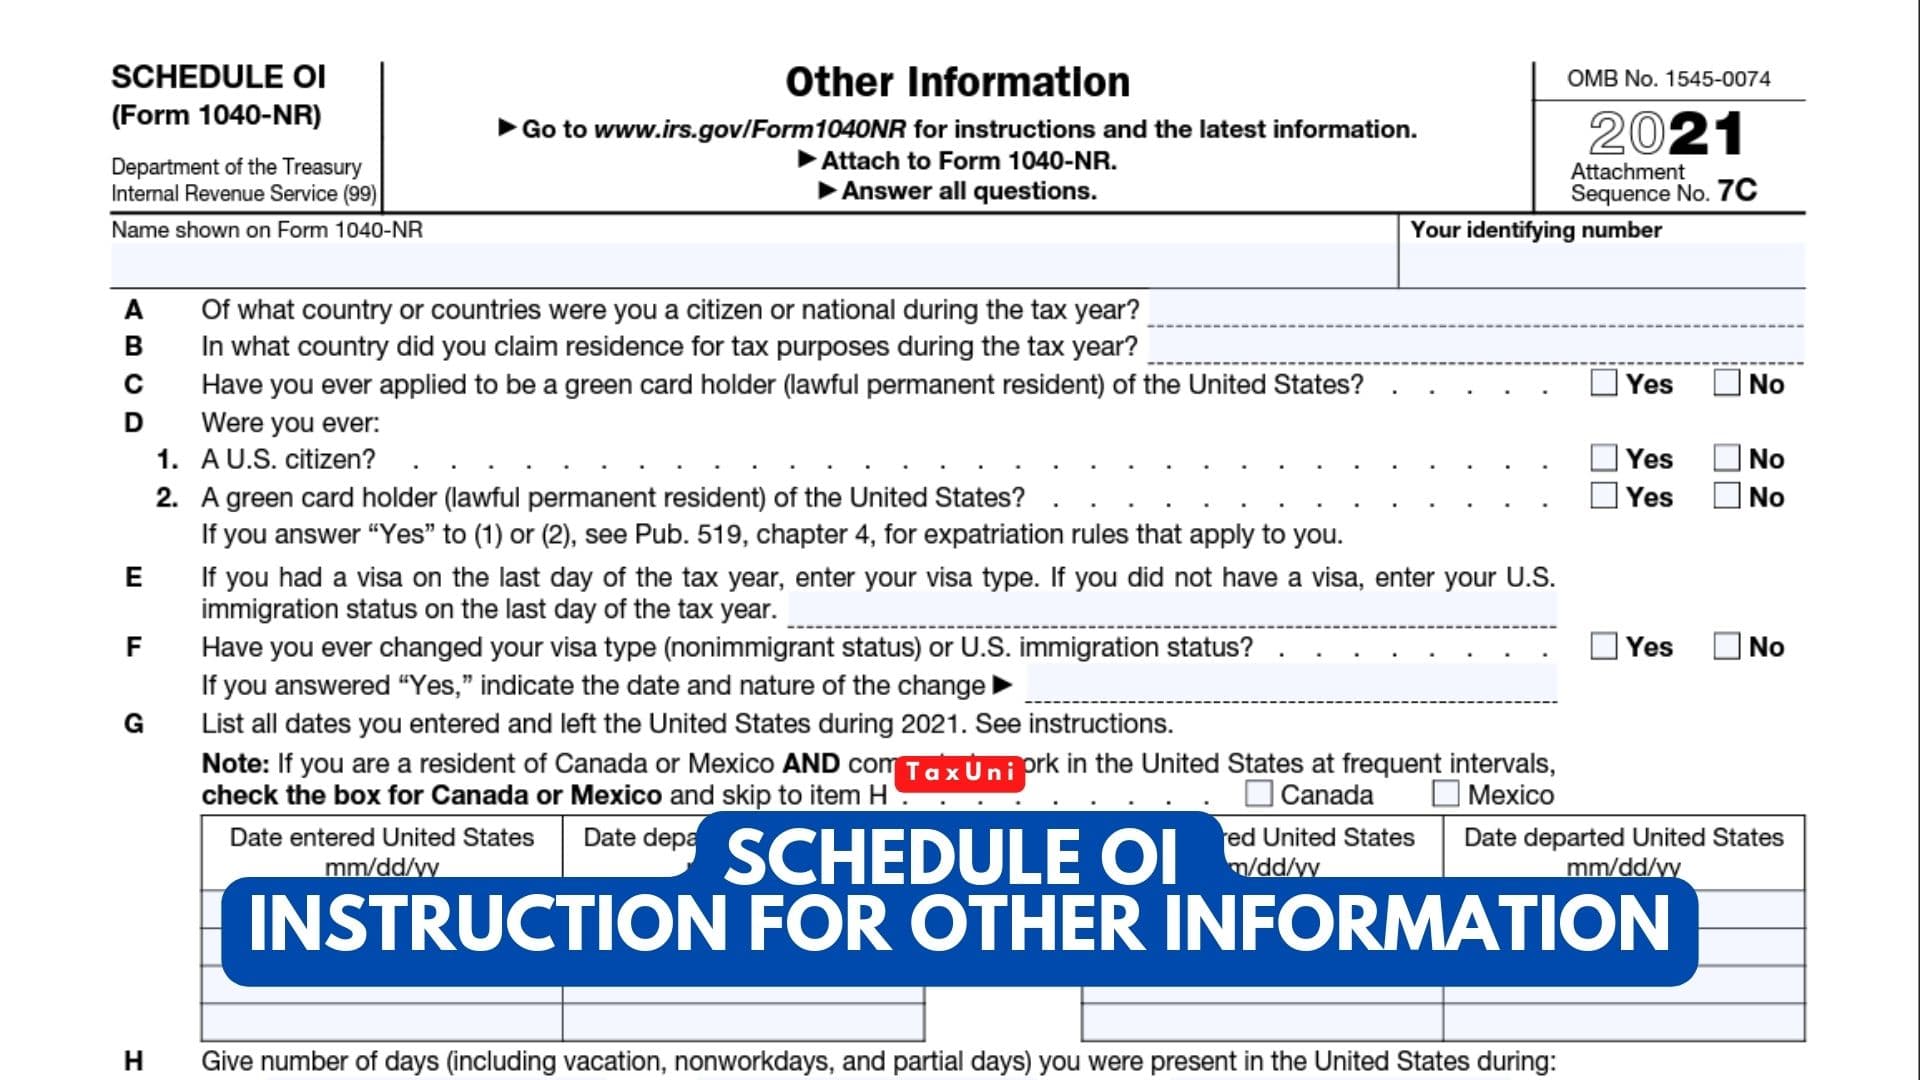 schedule-oi-instruction-for-other-information